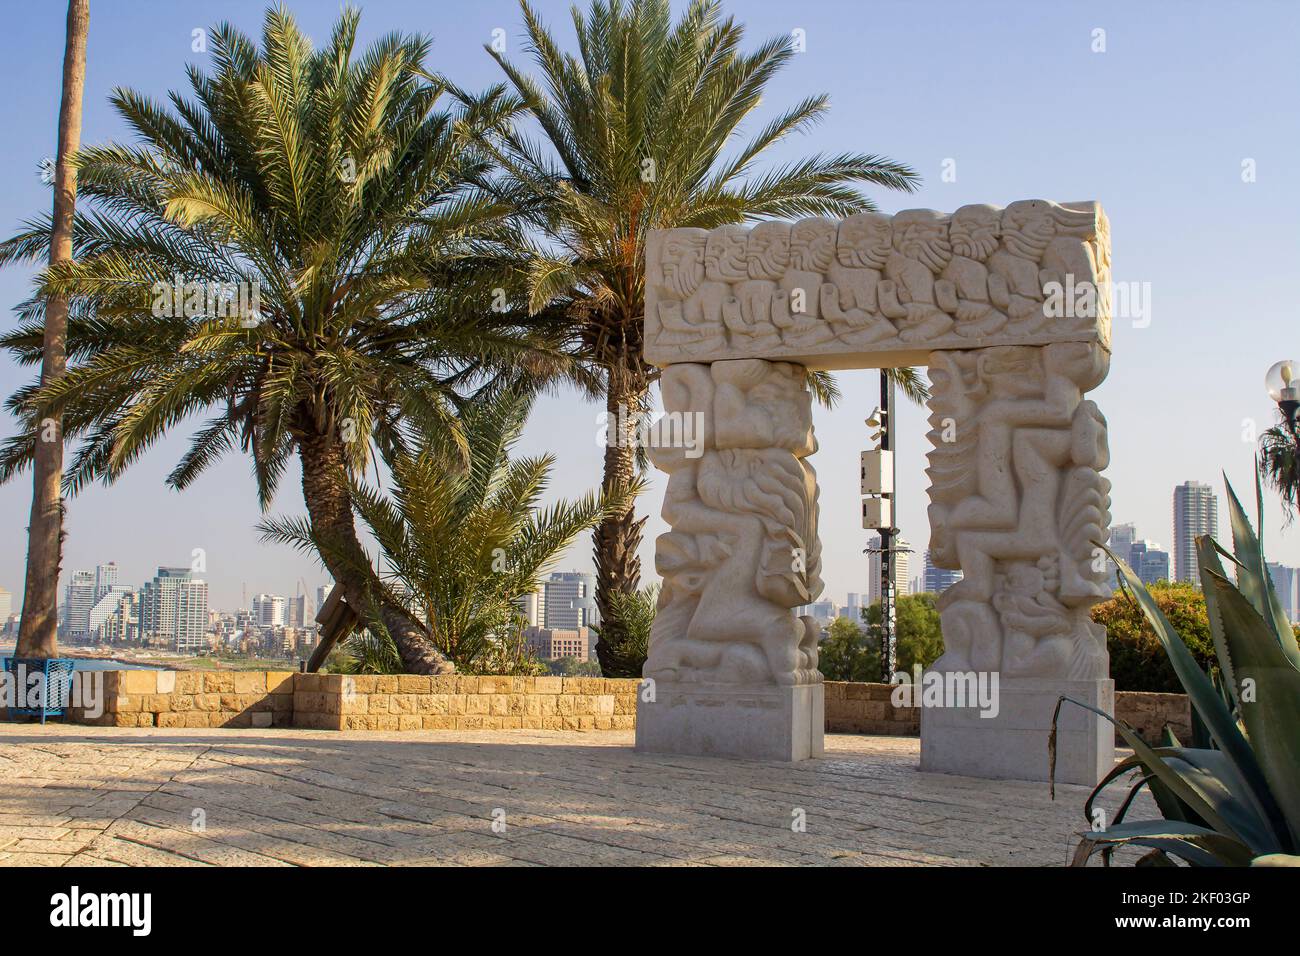 3 November 2022 The Gate of Faith monument standing in Peak Park in Old Jaffa Israel. The statue consists of sculpted pillars upon which rest a large Stock Photo